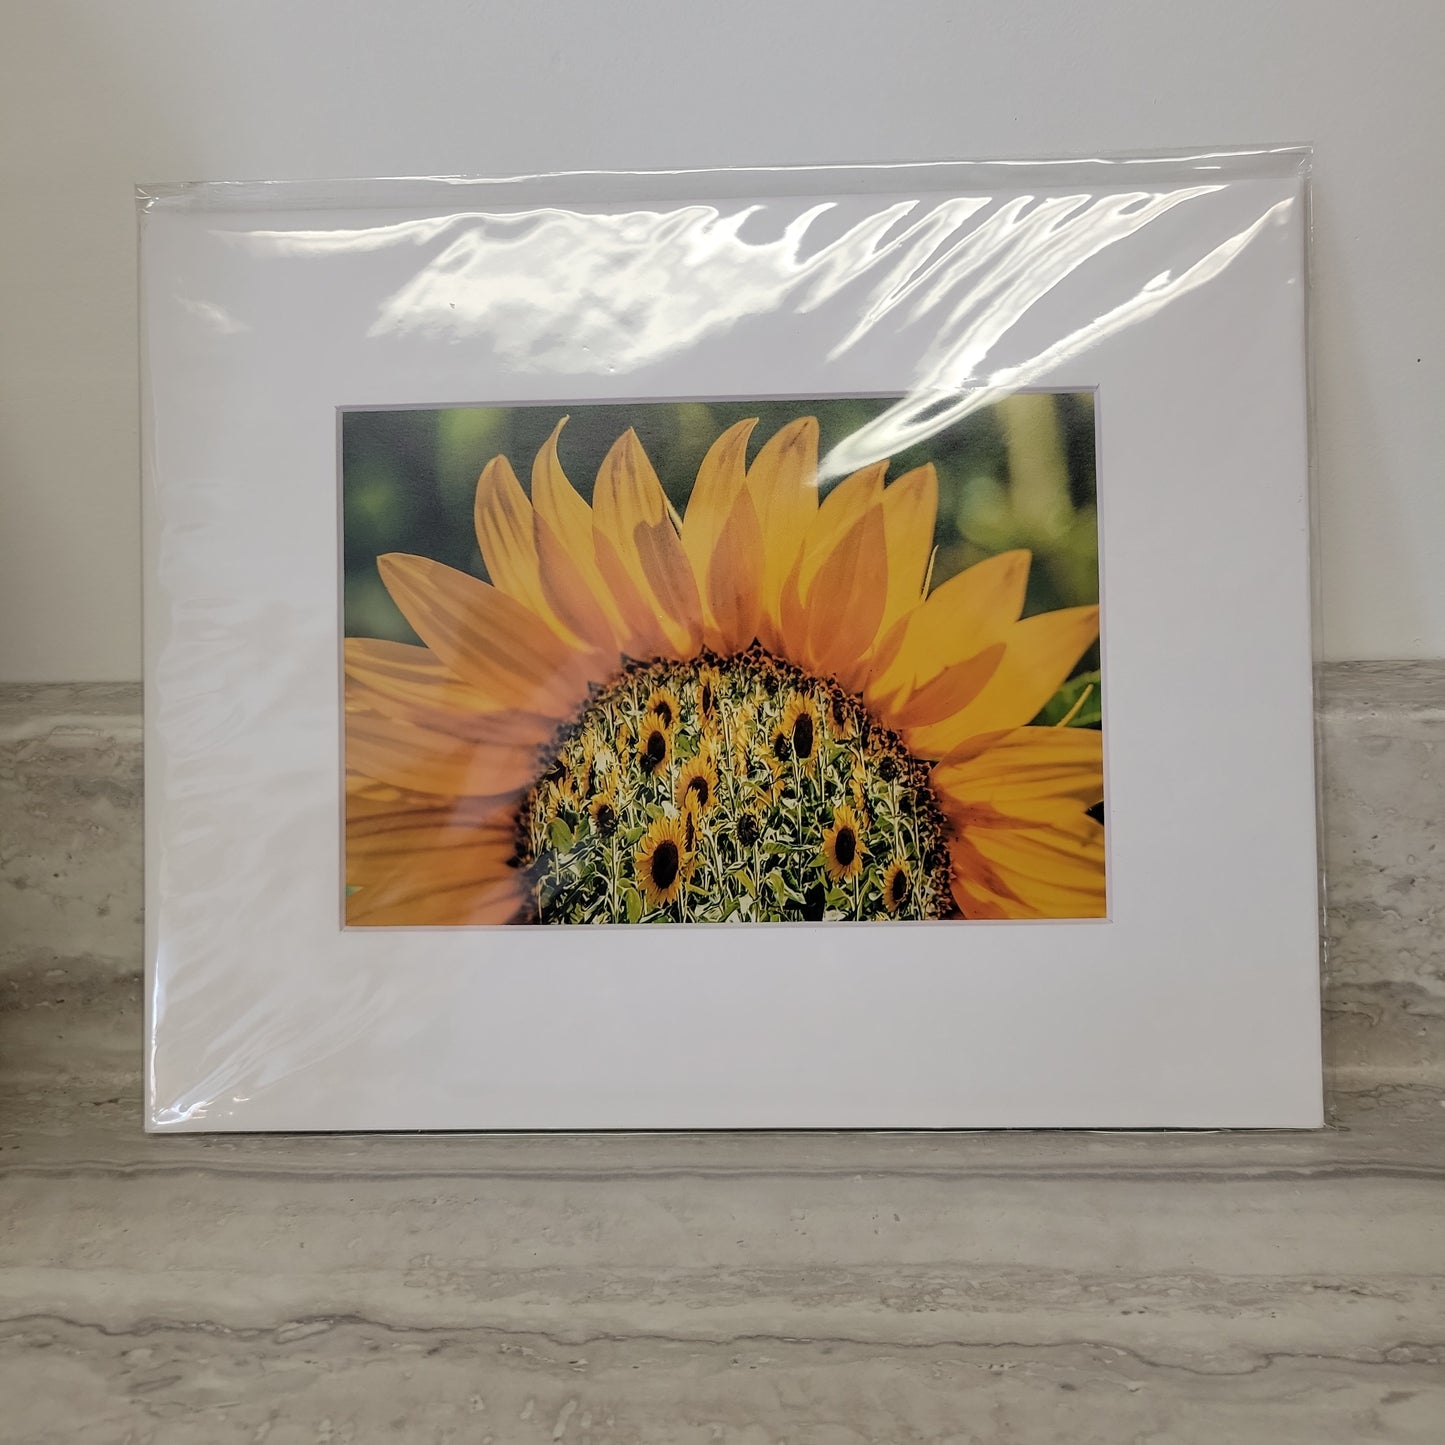 8x10 Matted Print